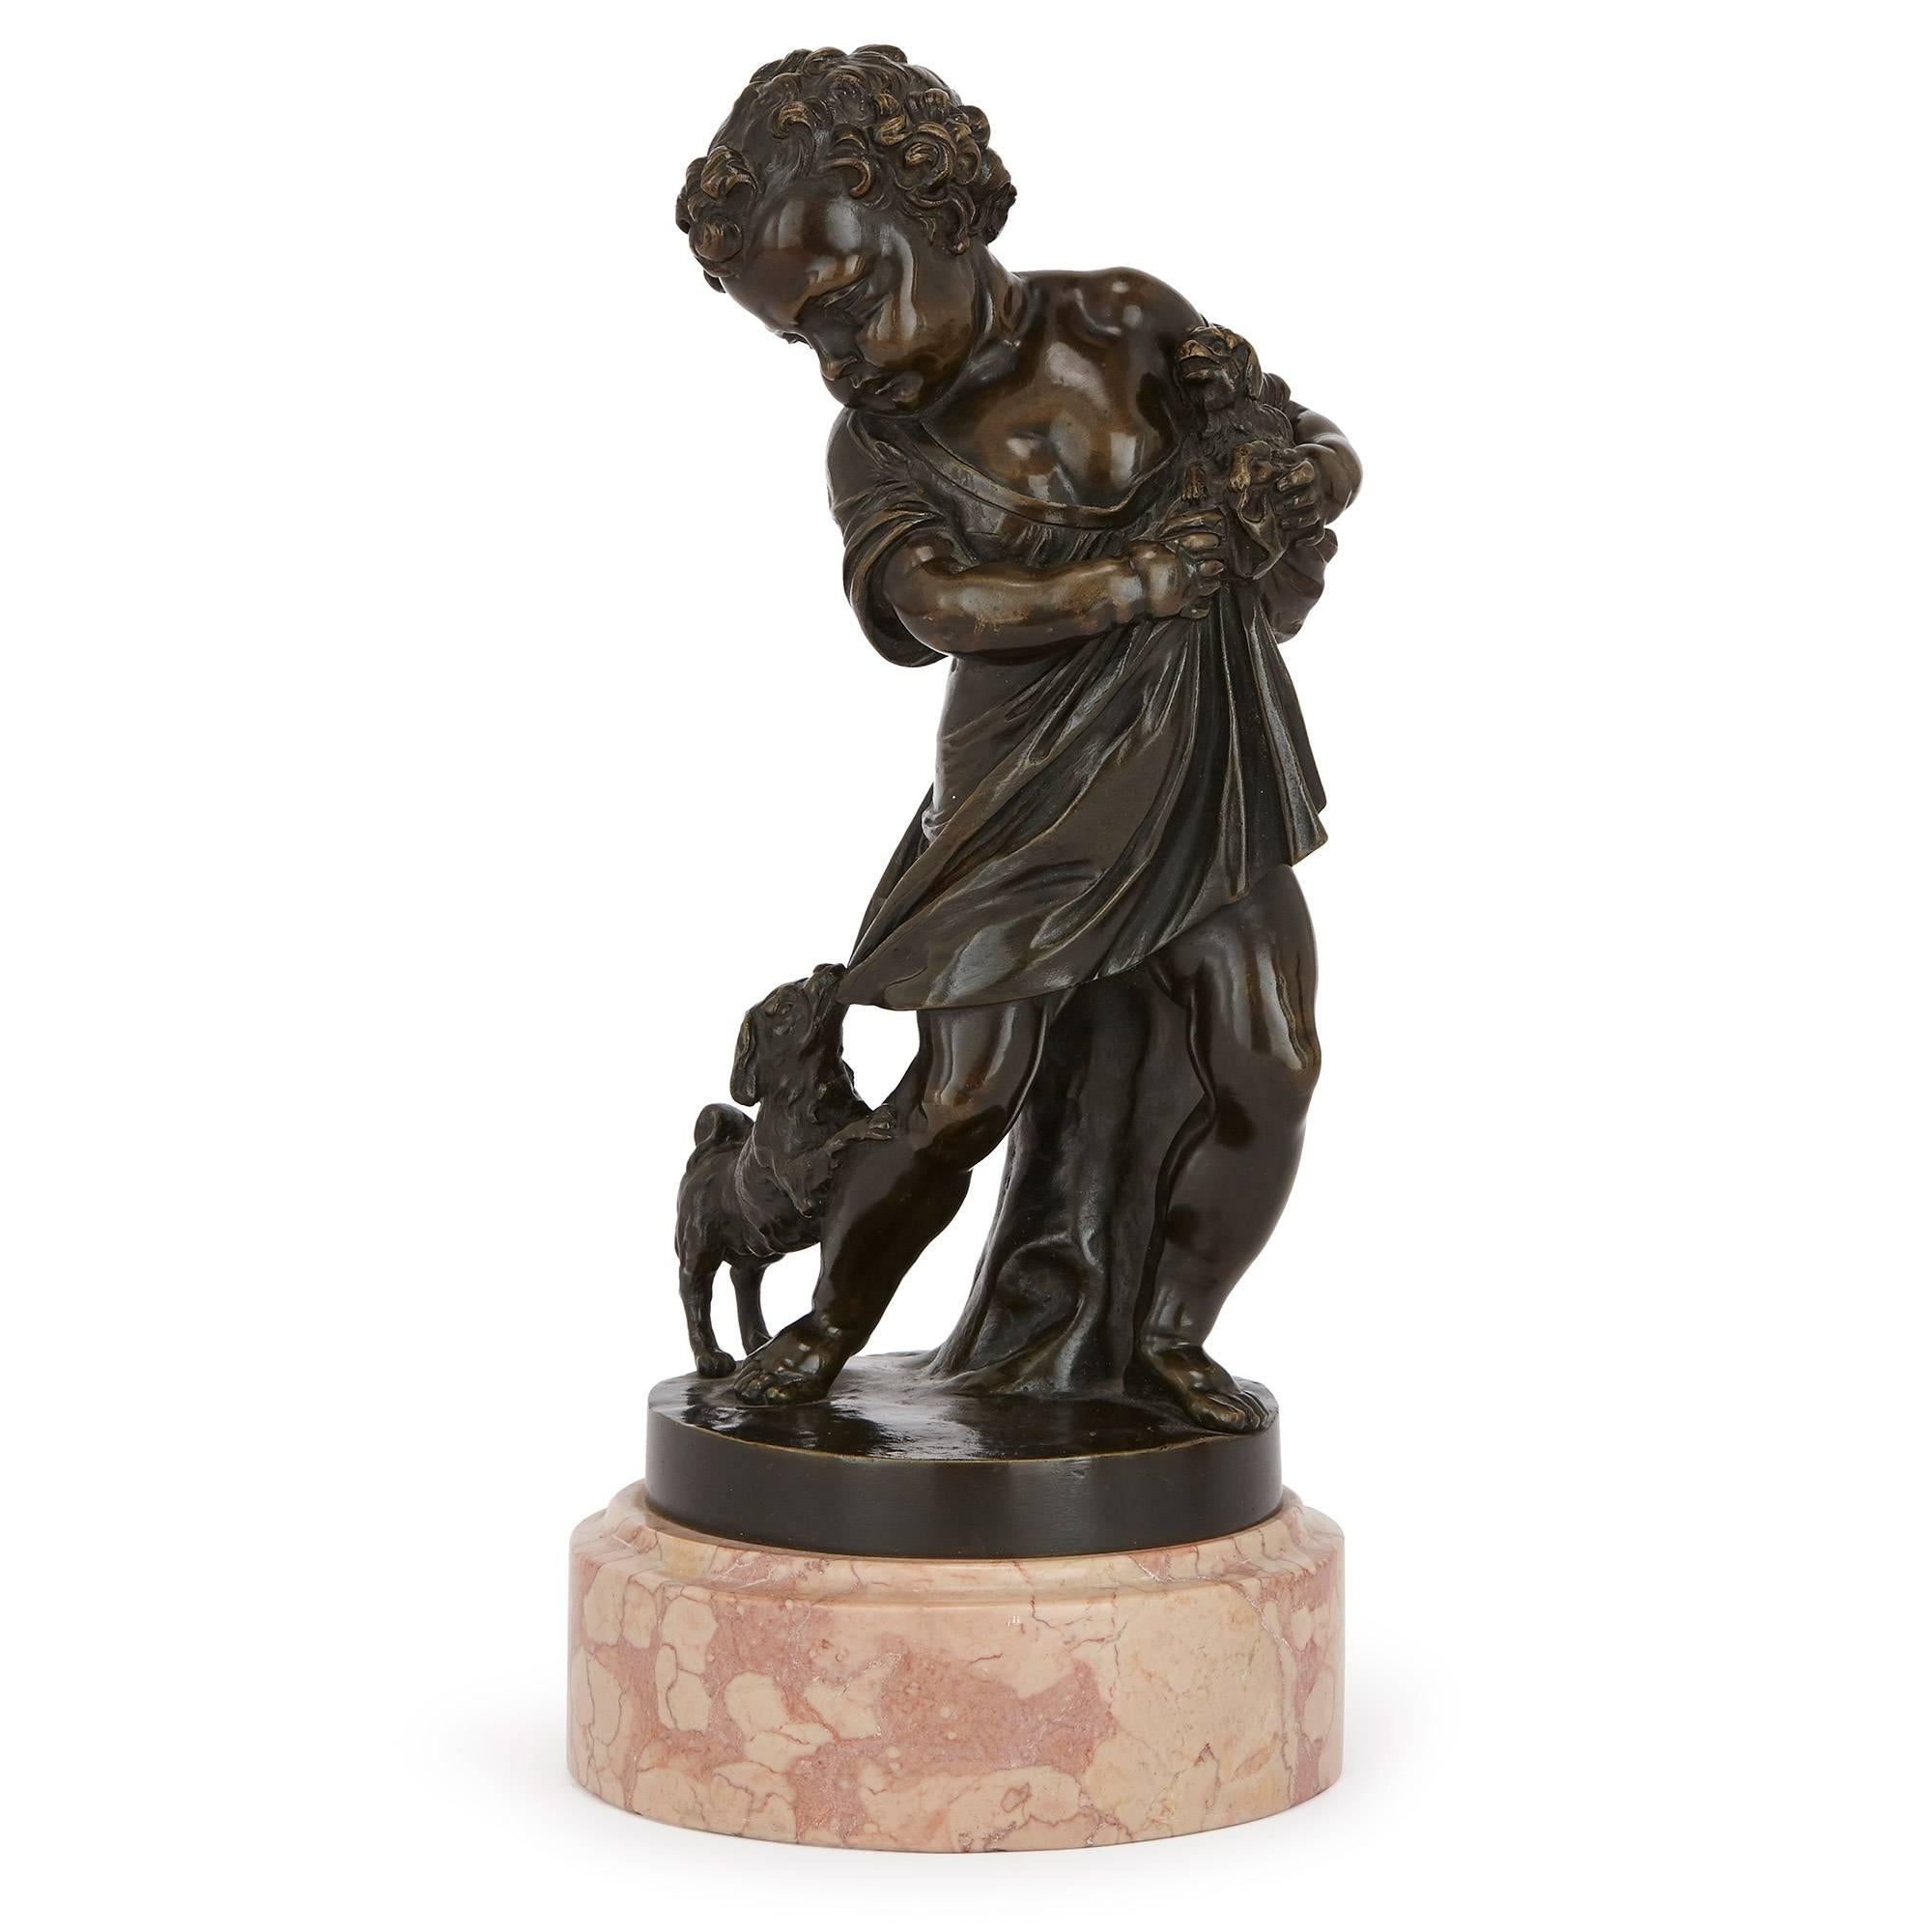 Full of humour and narrative detail, this joyous set of two figural sculptures are charmingly cast in bronze to depict young boys playing with animals. One of the figures shows a boy in draped clothing holding a dog to his chest, while another dog